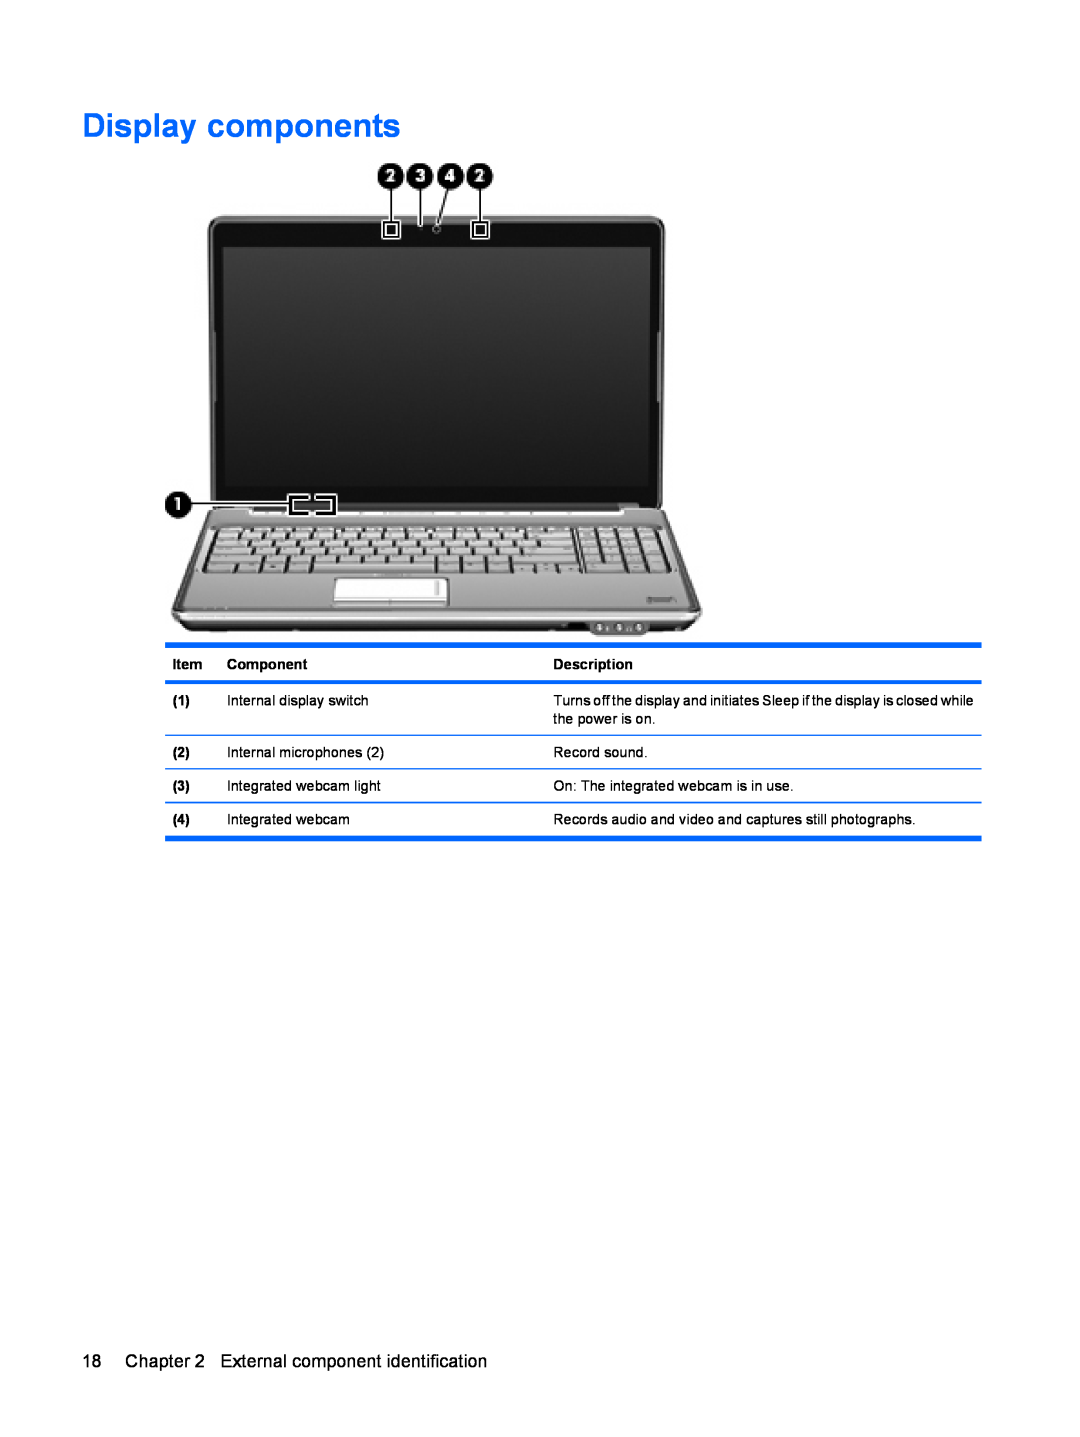 HP DV6 manual Display components, External component identification 